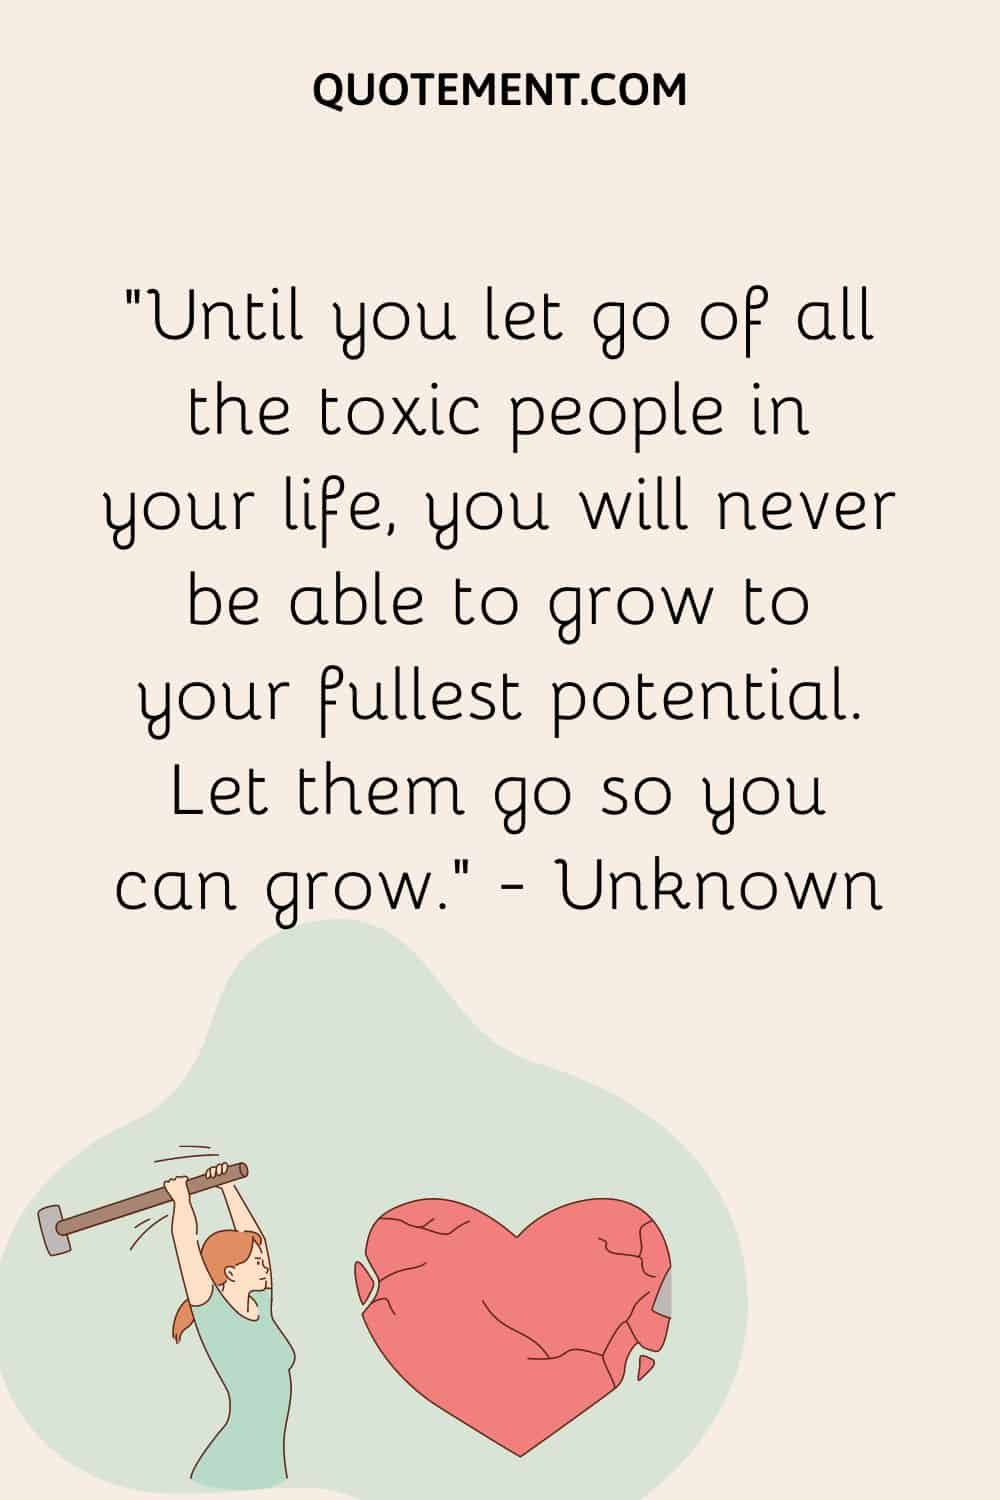 Until you let go of all the toxic people in your life, you will never be able to grow to your fullest potential